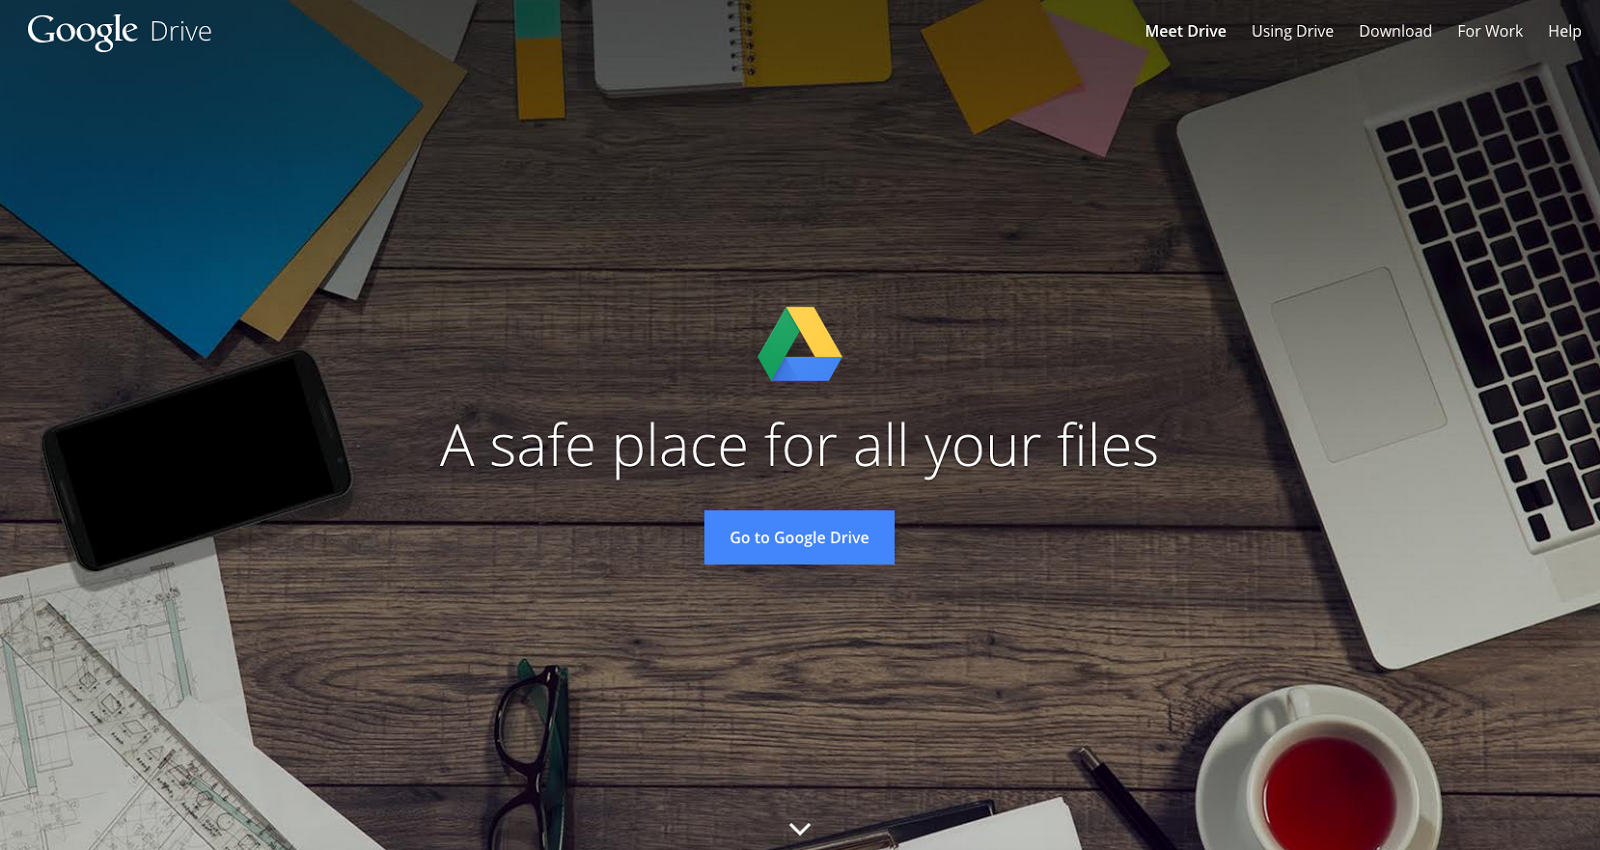 saas-value-propositions-7-google-drive